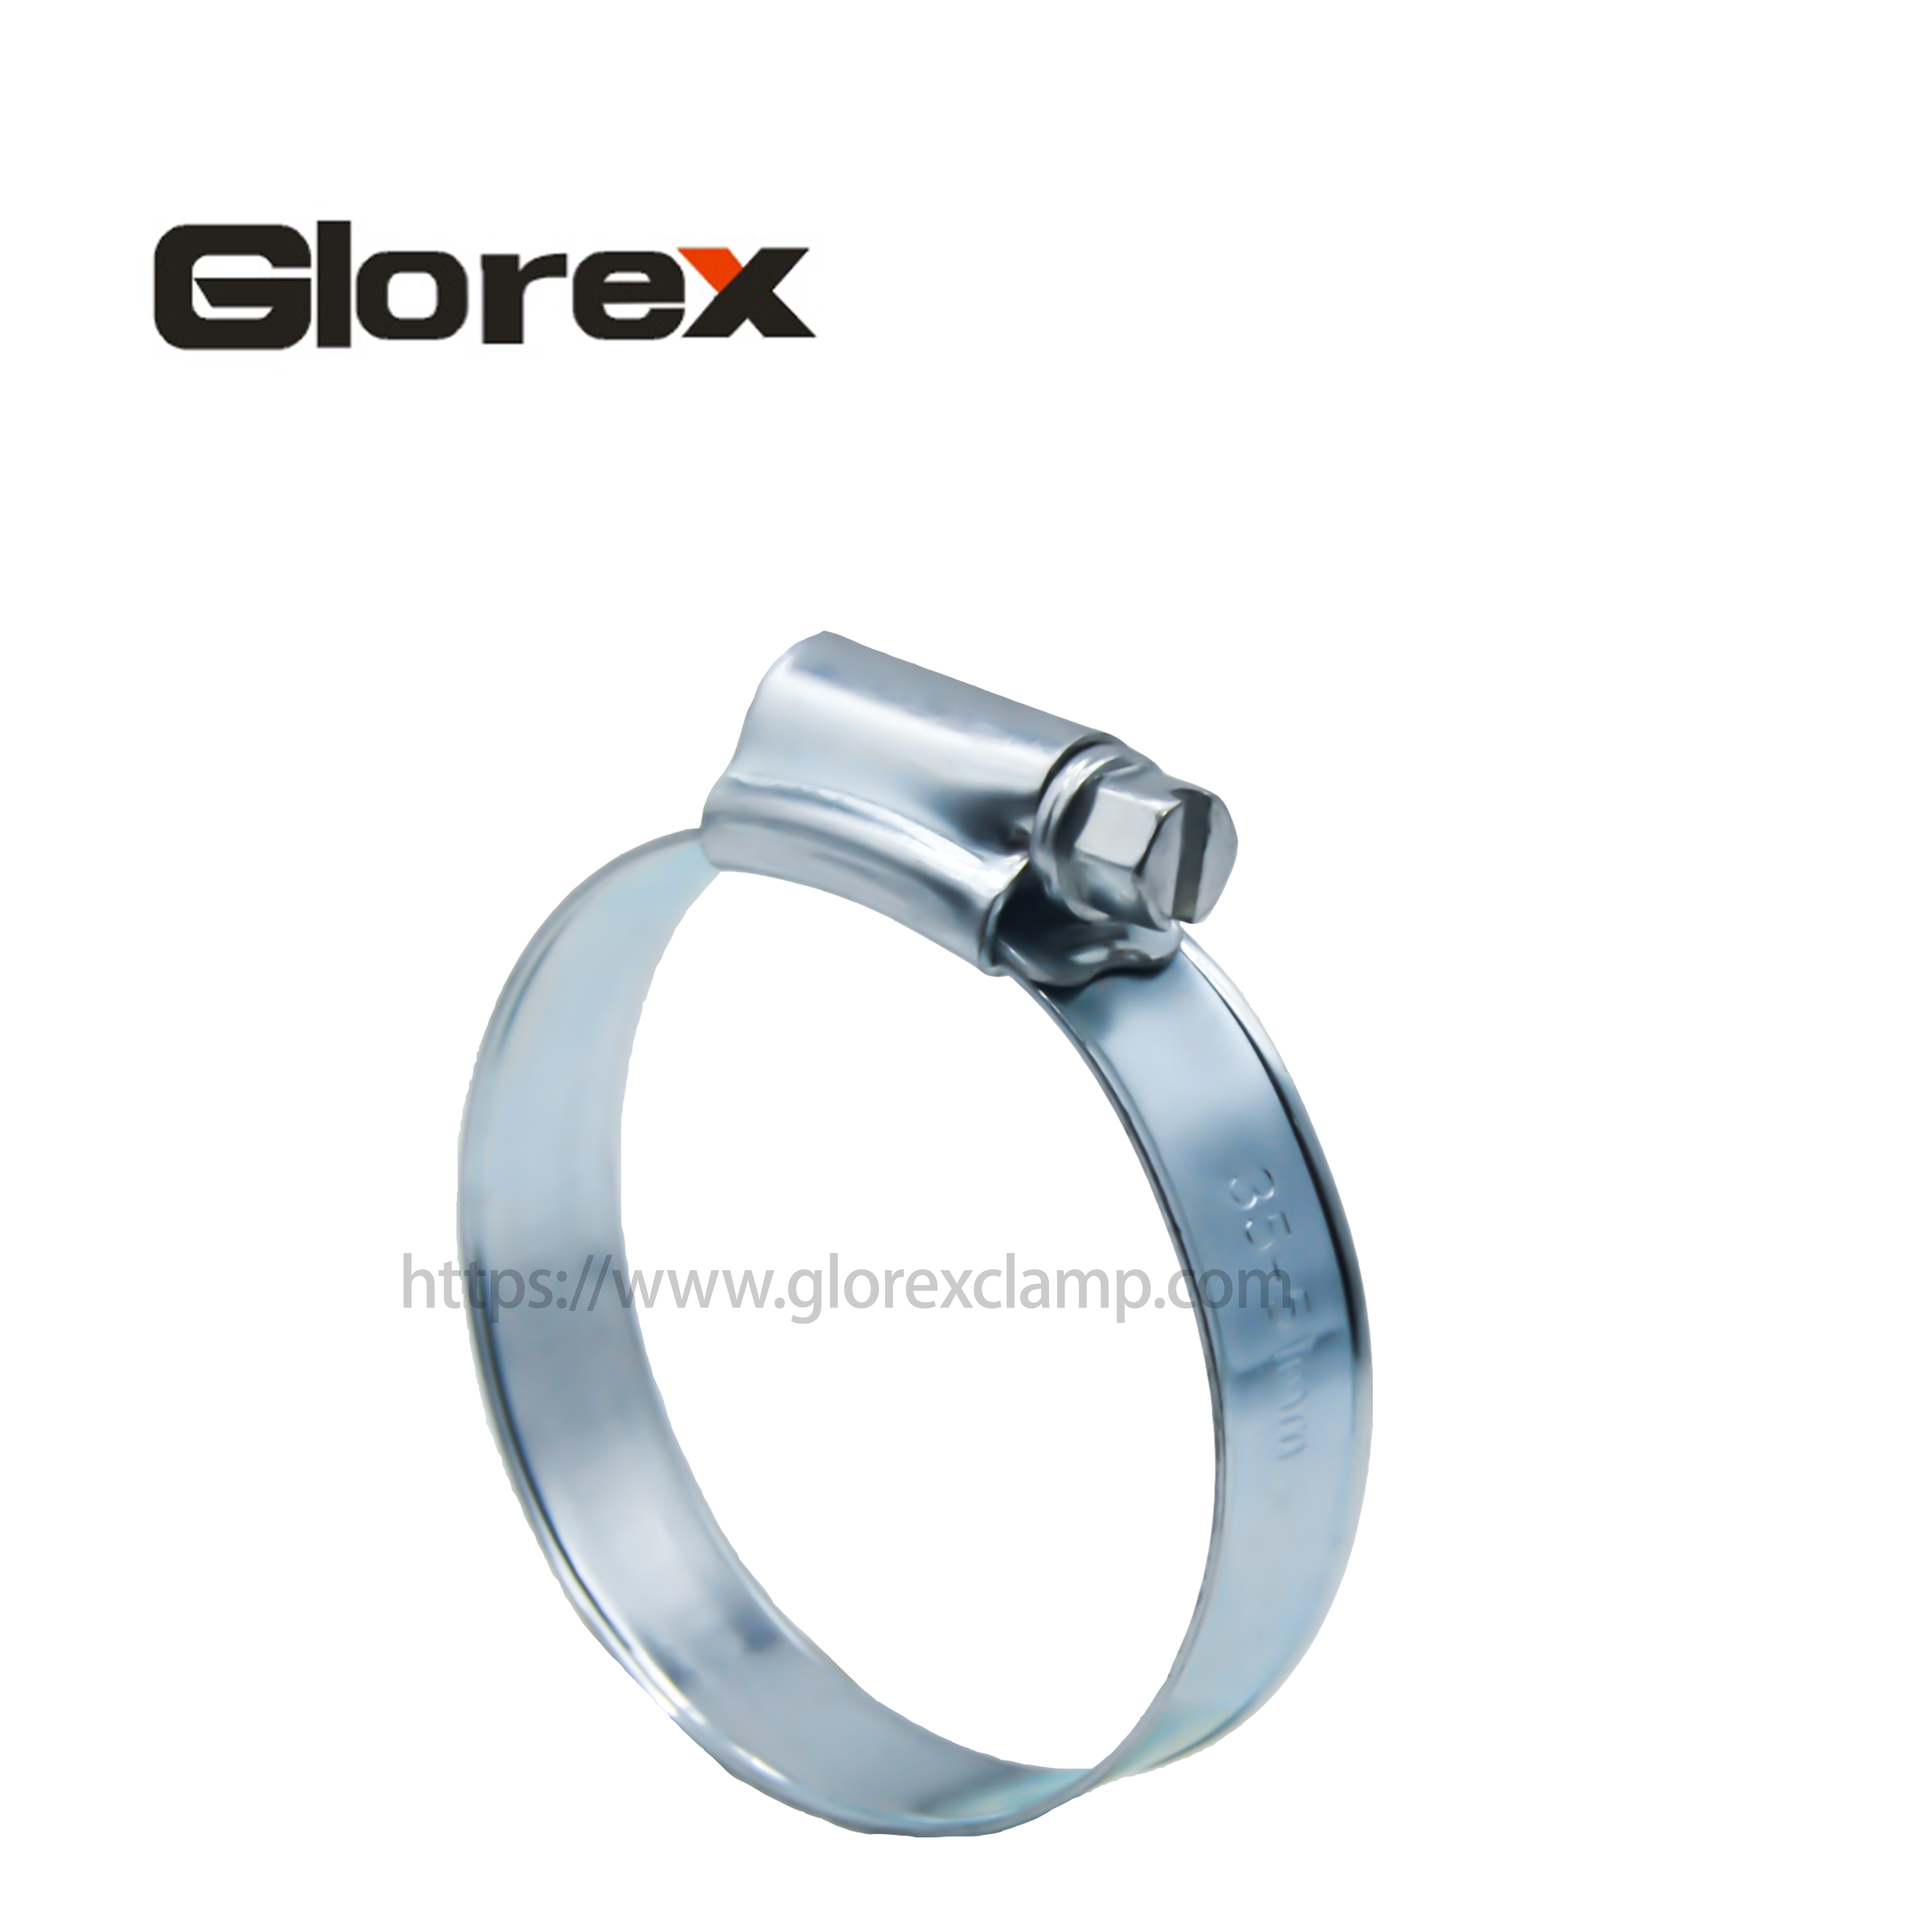 China Gold Supplier for Hose Clamp With Screw - British type hose clamp with welding – Glorex